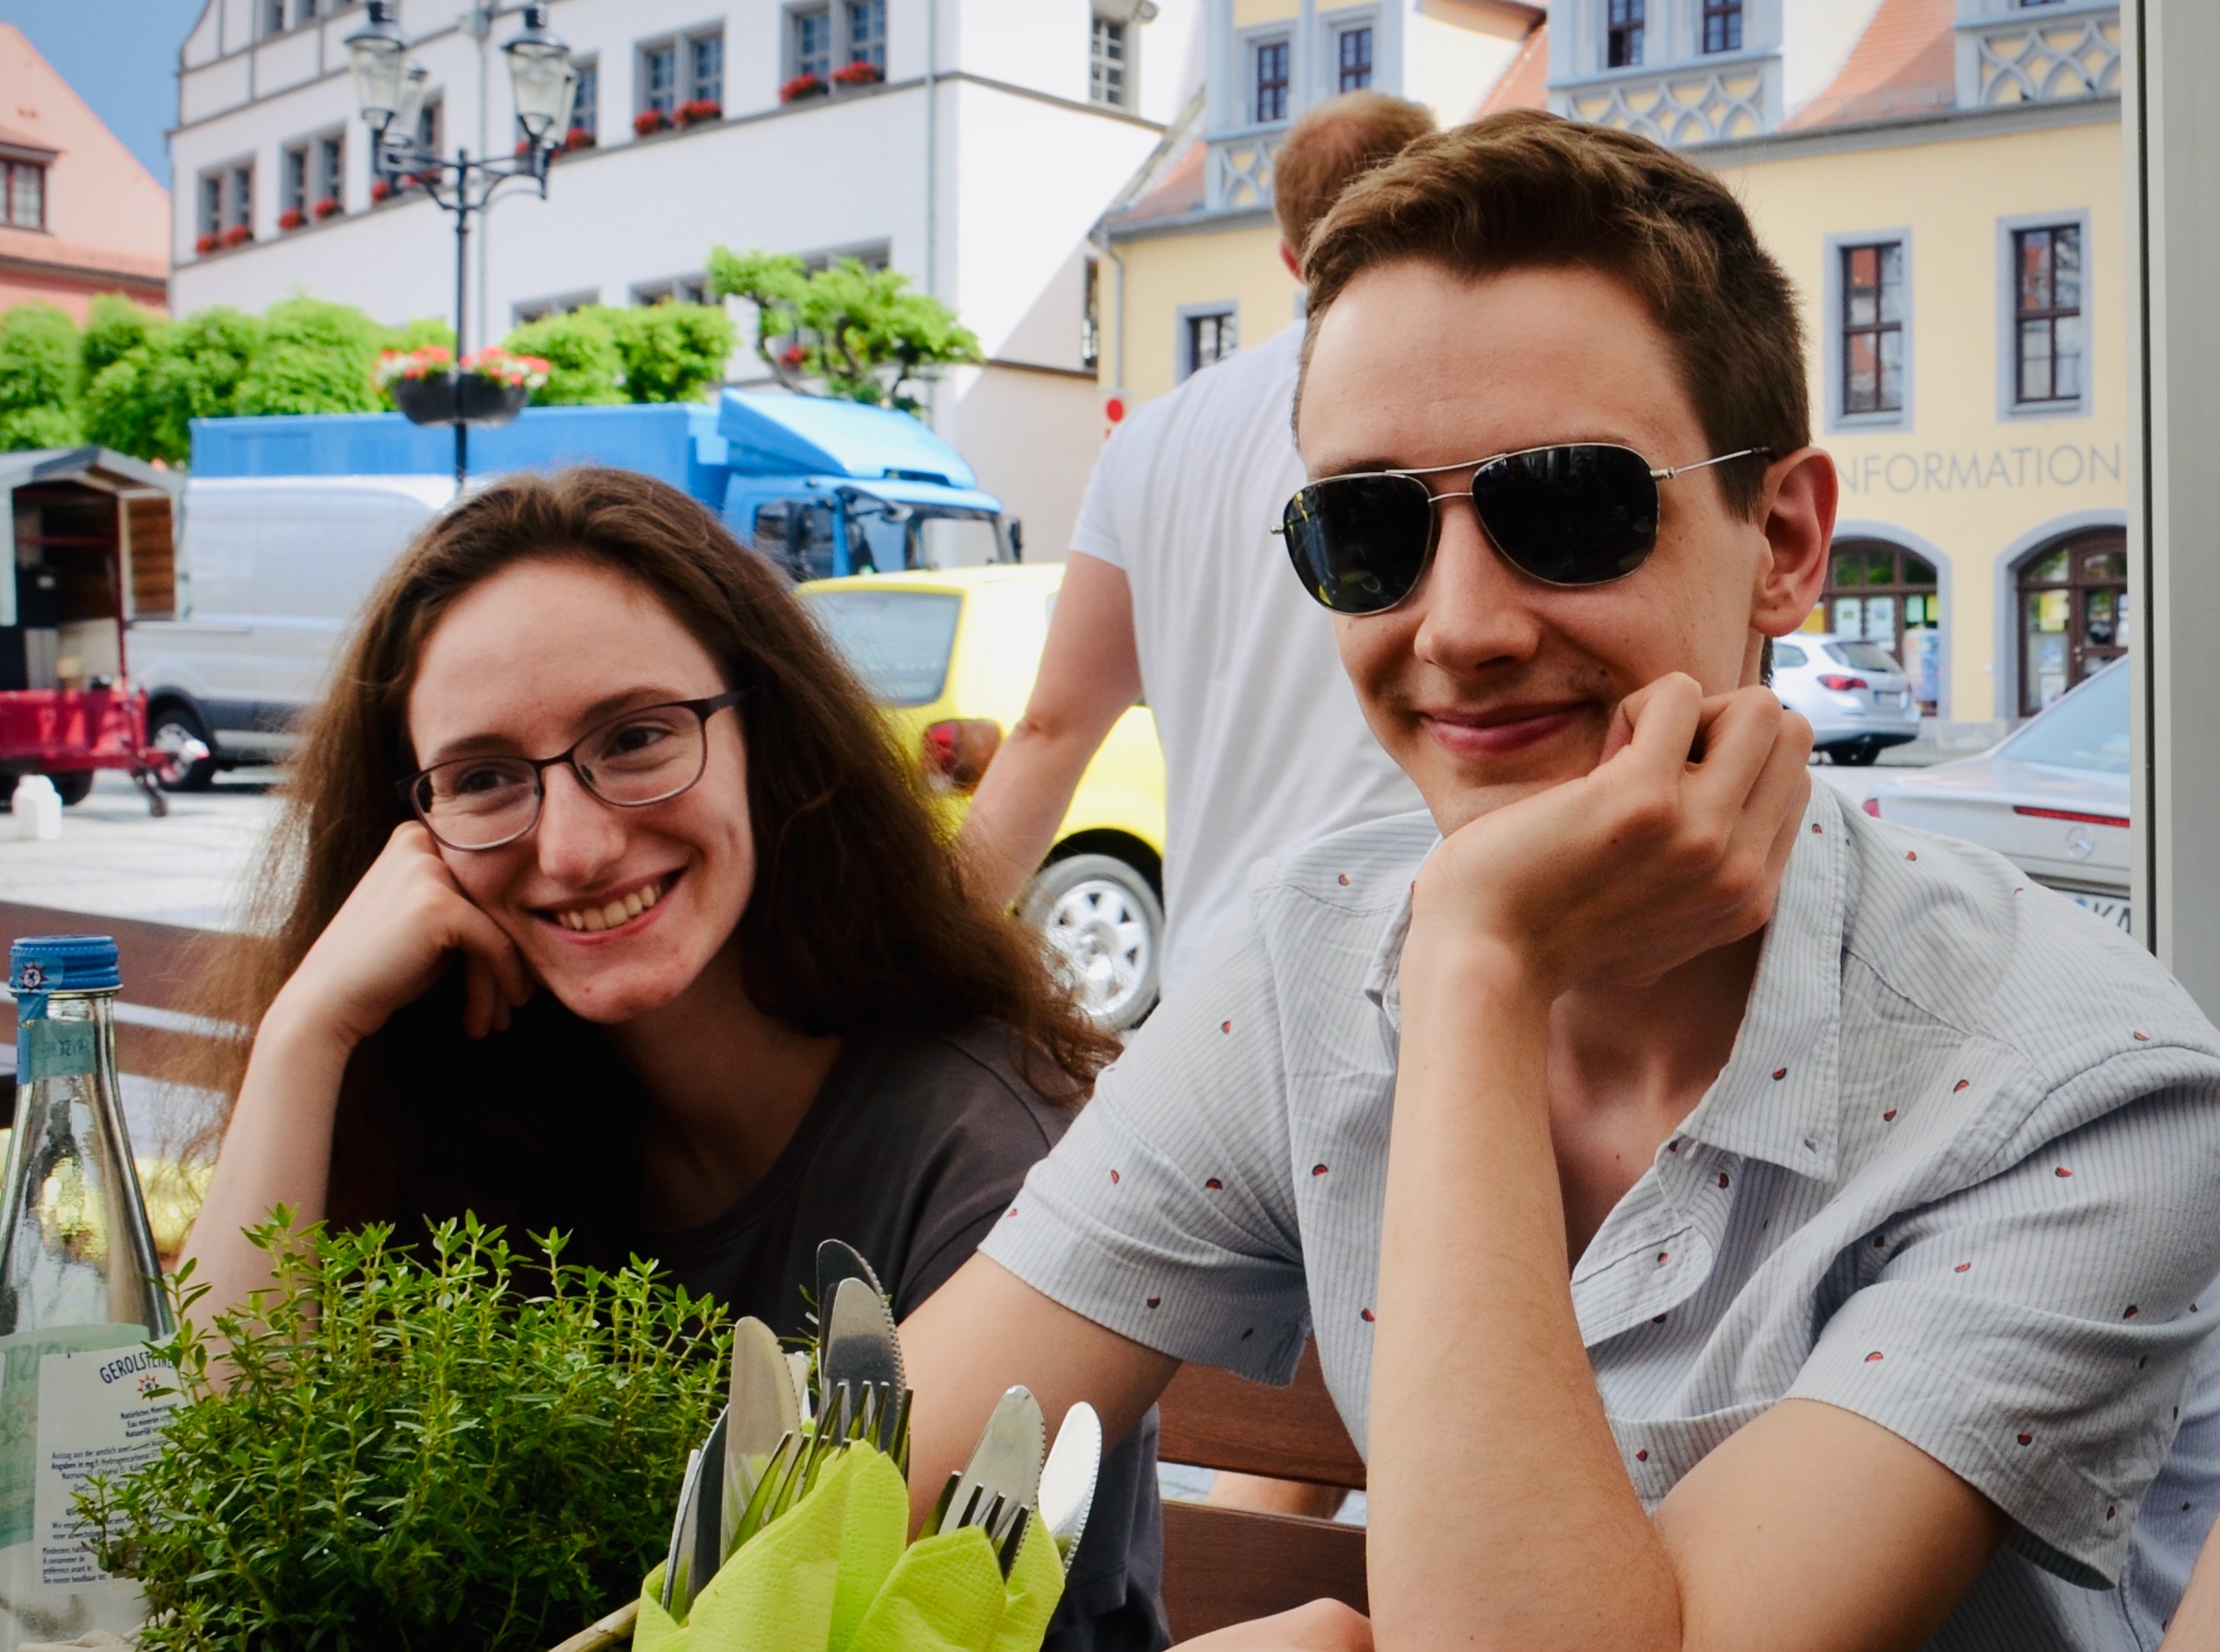  Rosemarie and Alex enjoy lunch in the market square, Naumburg, Germany.  